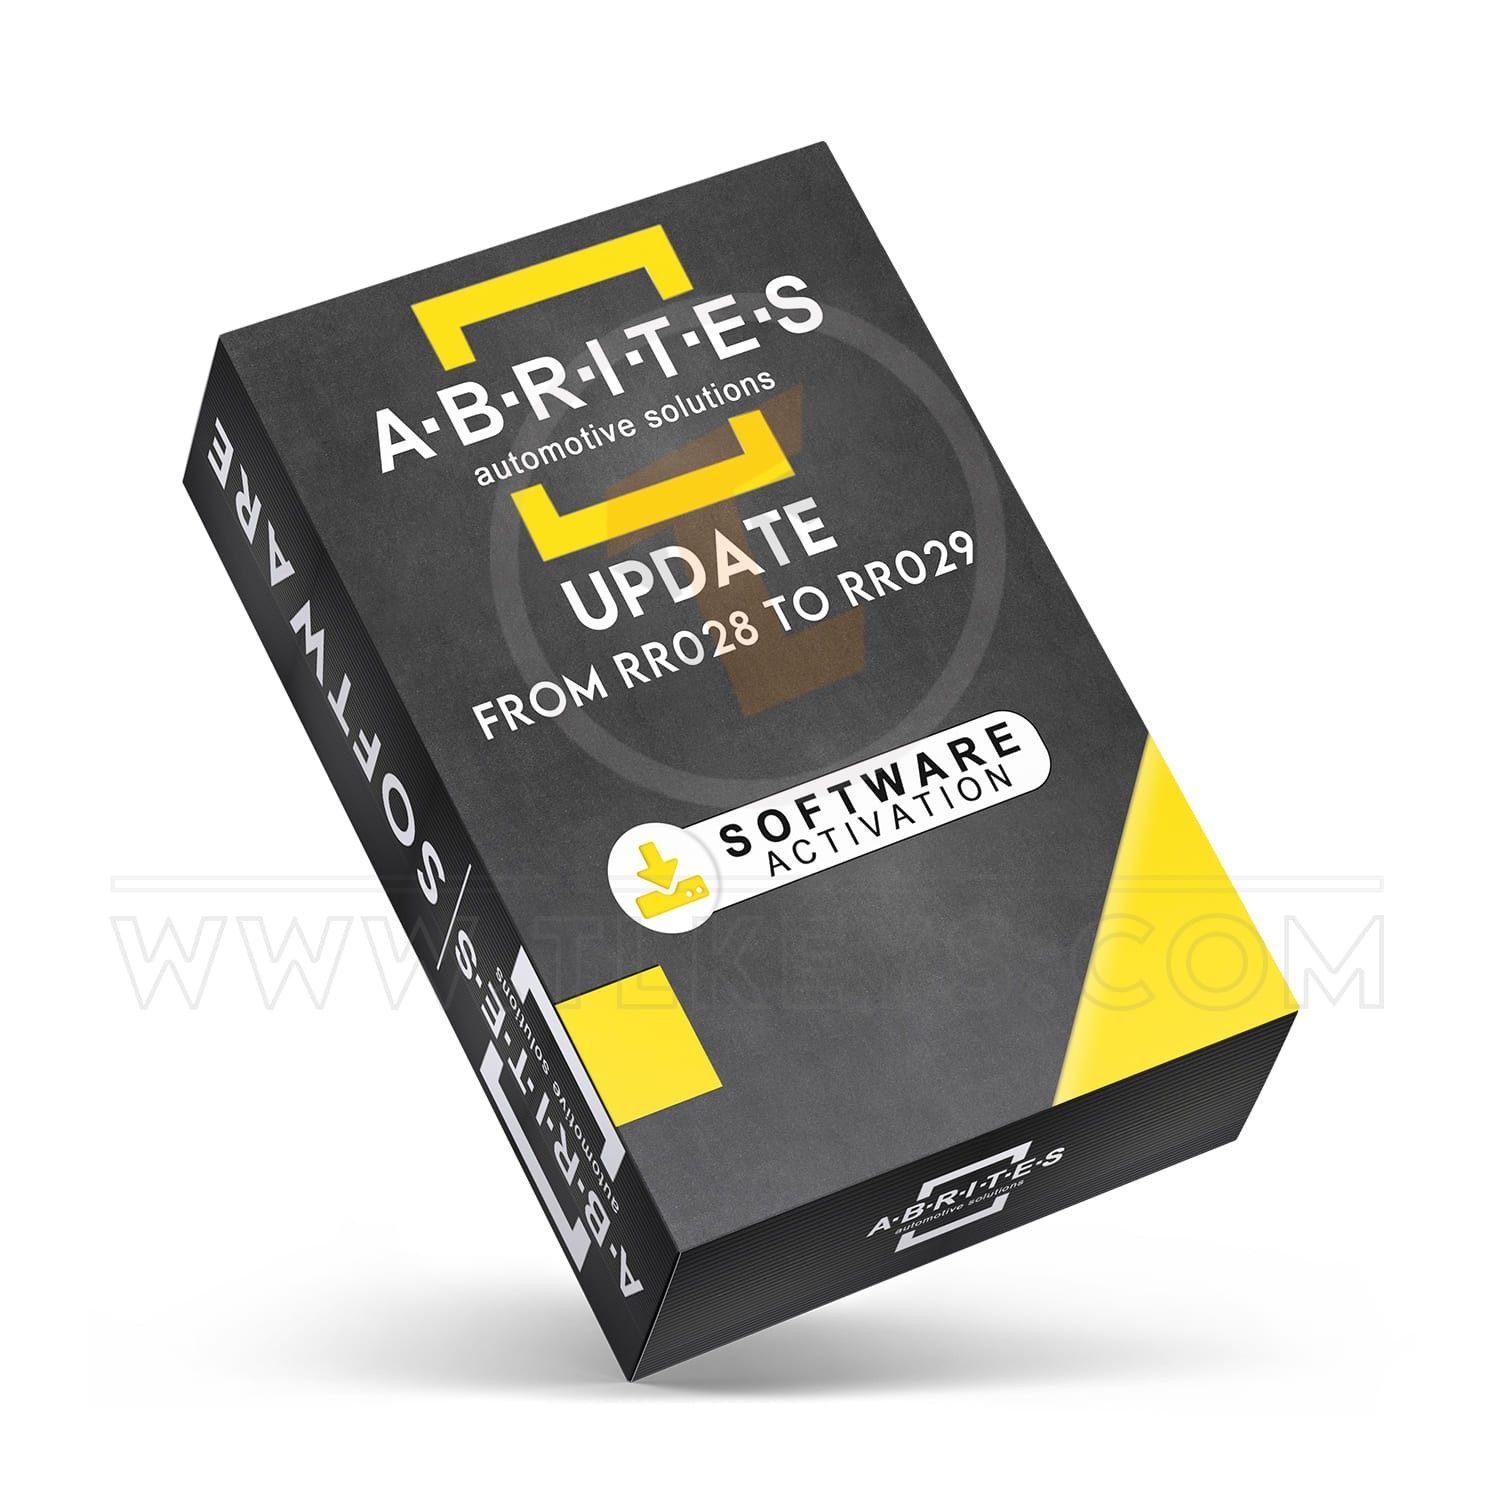 Abrites Software Update from RR028 to RR029 software